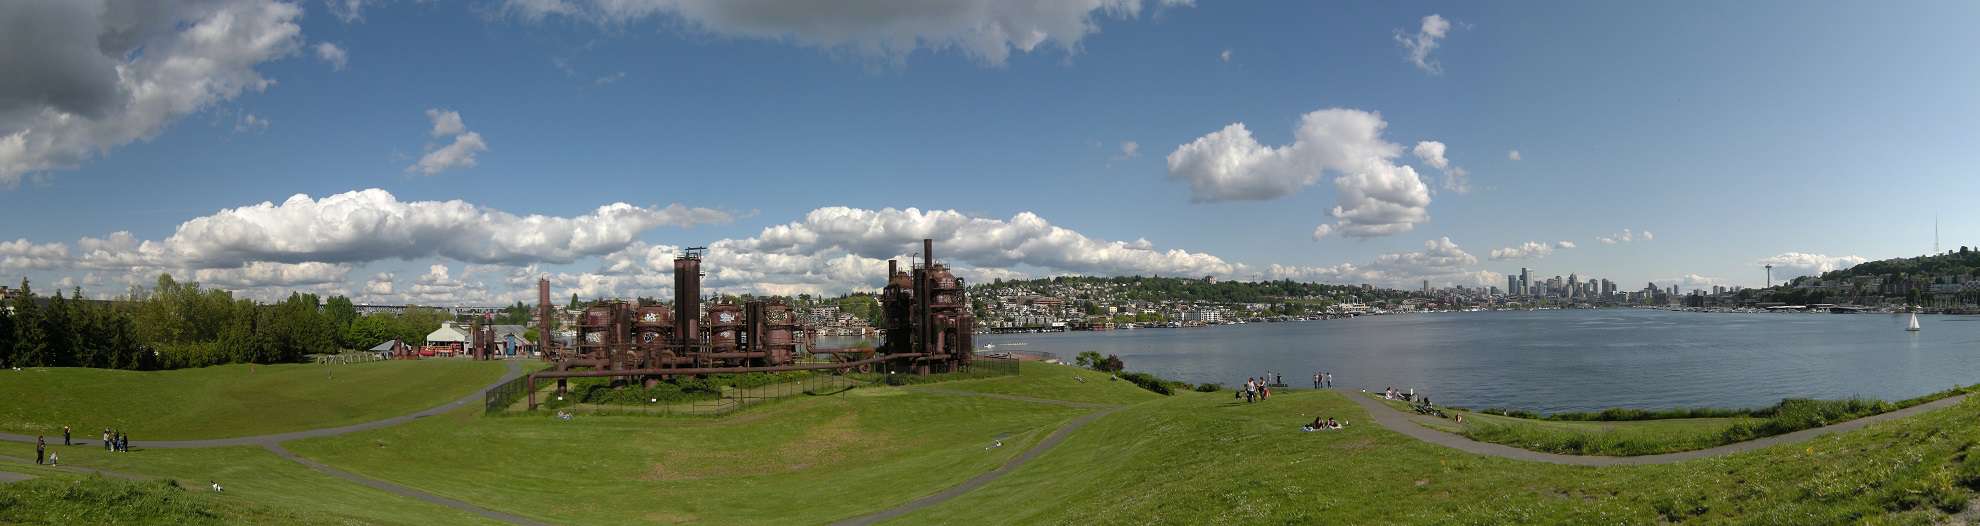 Gas_Works_pano_compressed